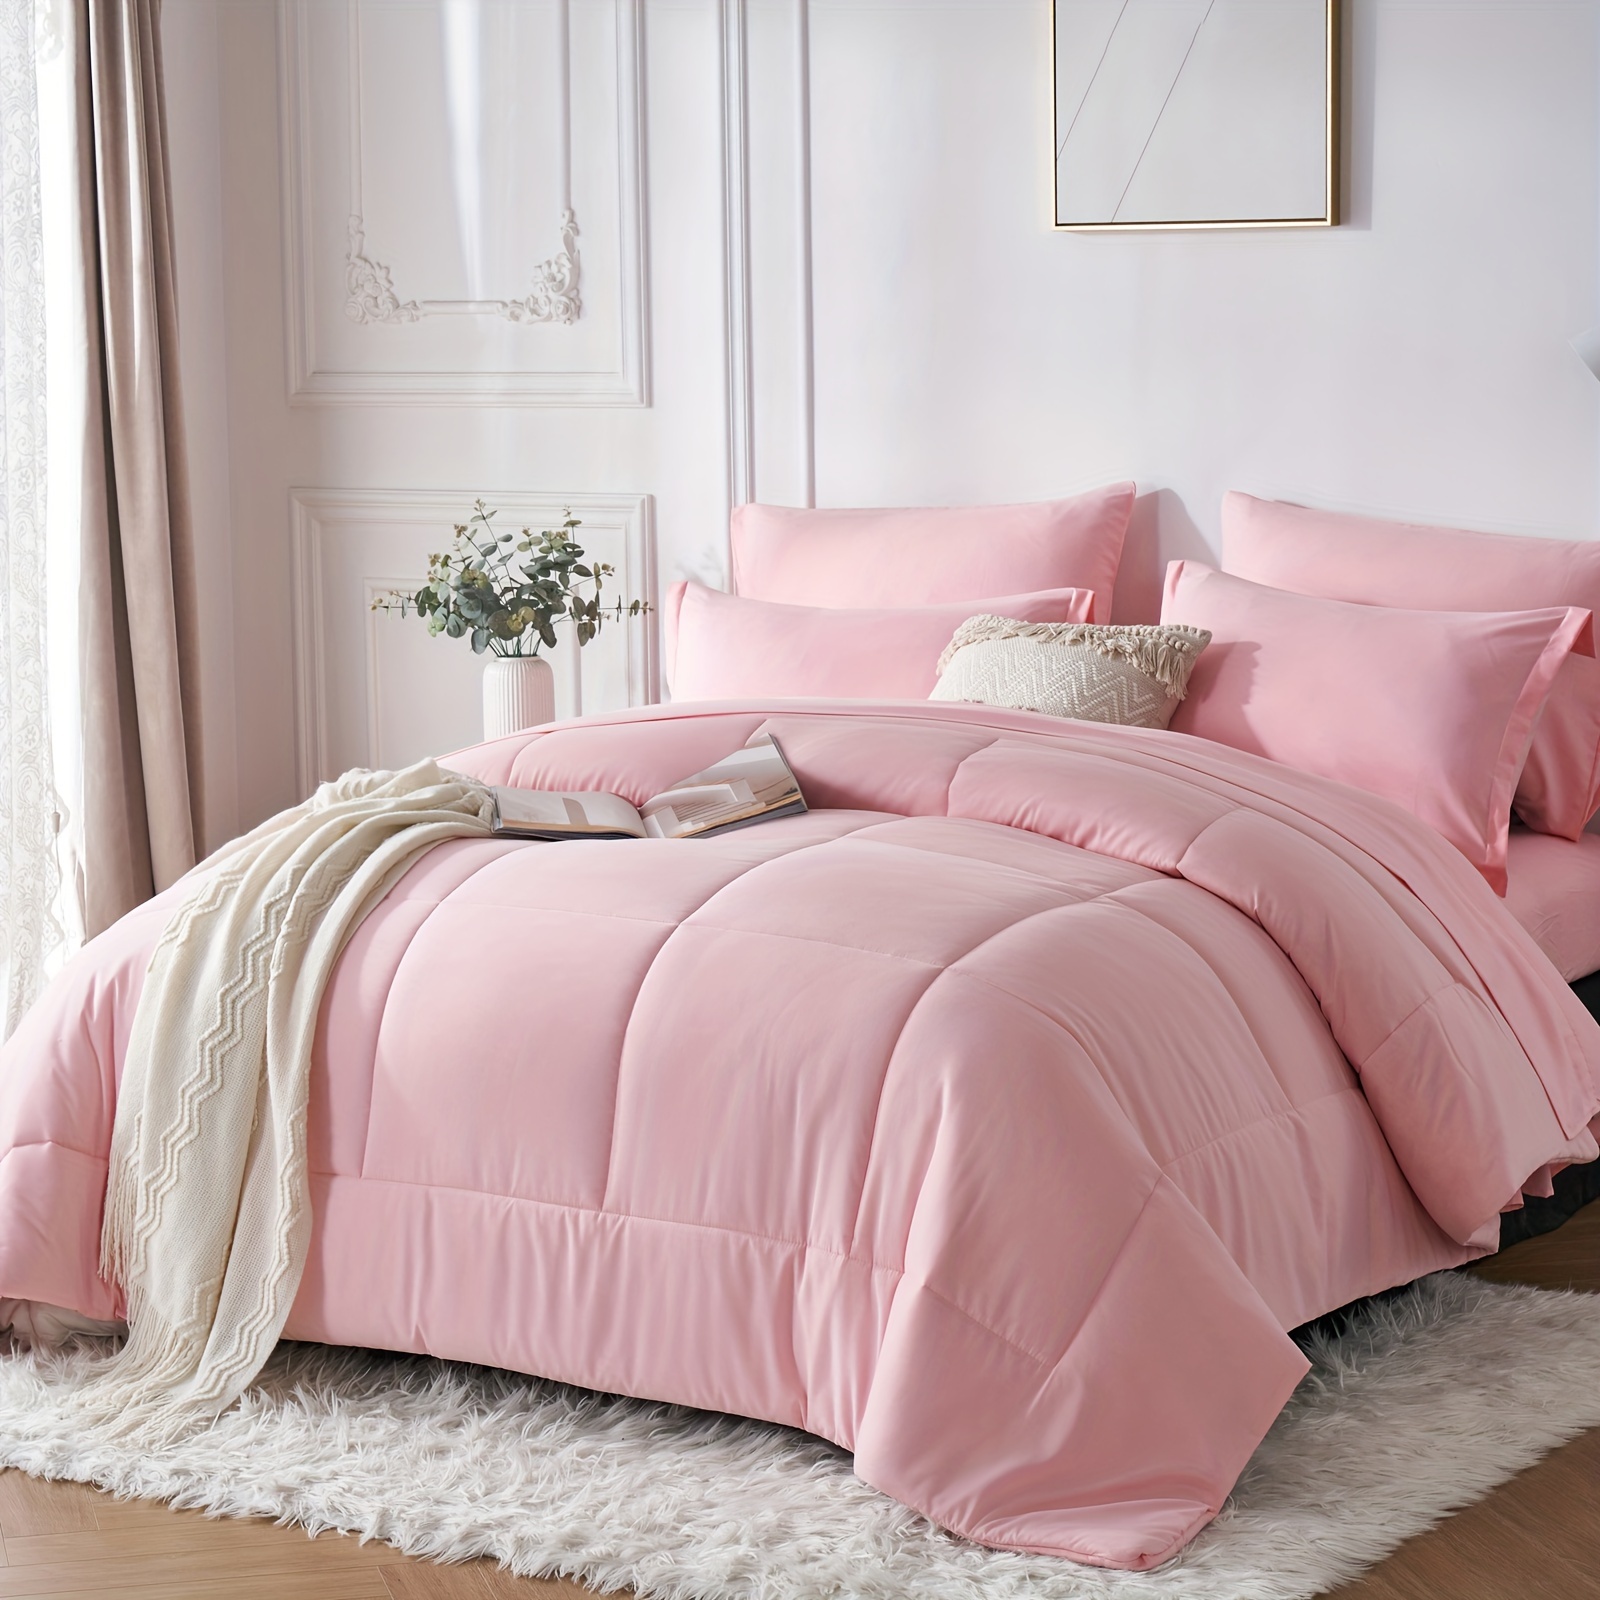 

5/7pcs Pink Down Alternative Comforter Sets, Twin/full/queen/king Size Bed In A Bag, Soft Microfiber Lightweight Bedding Set For All Seasons